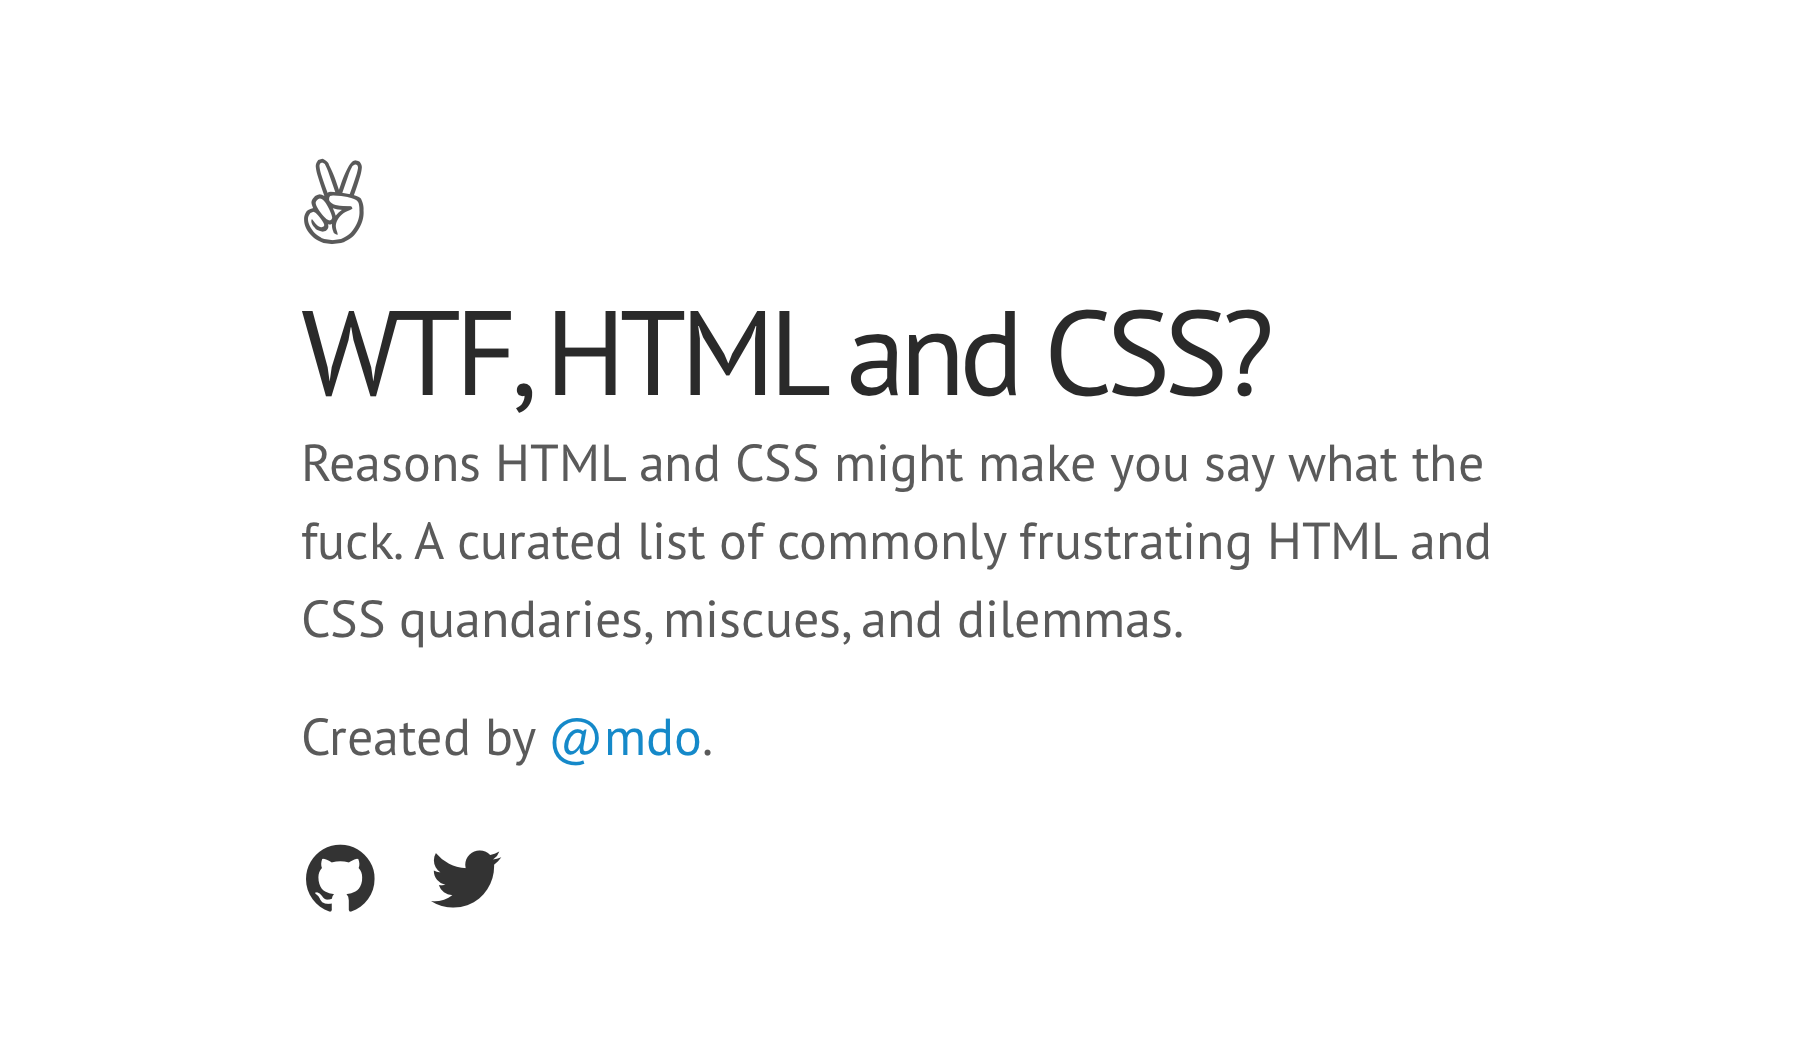 WTF, HTML and CSS?